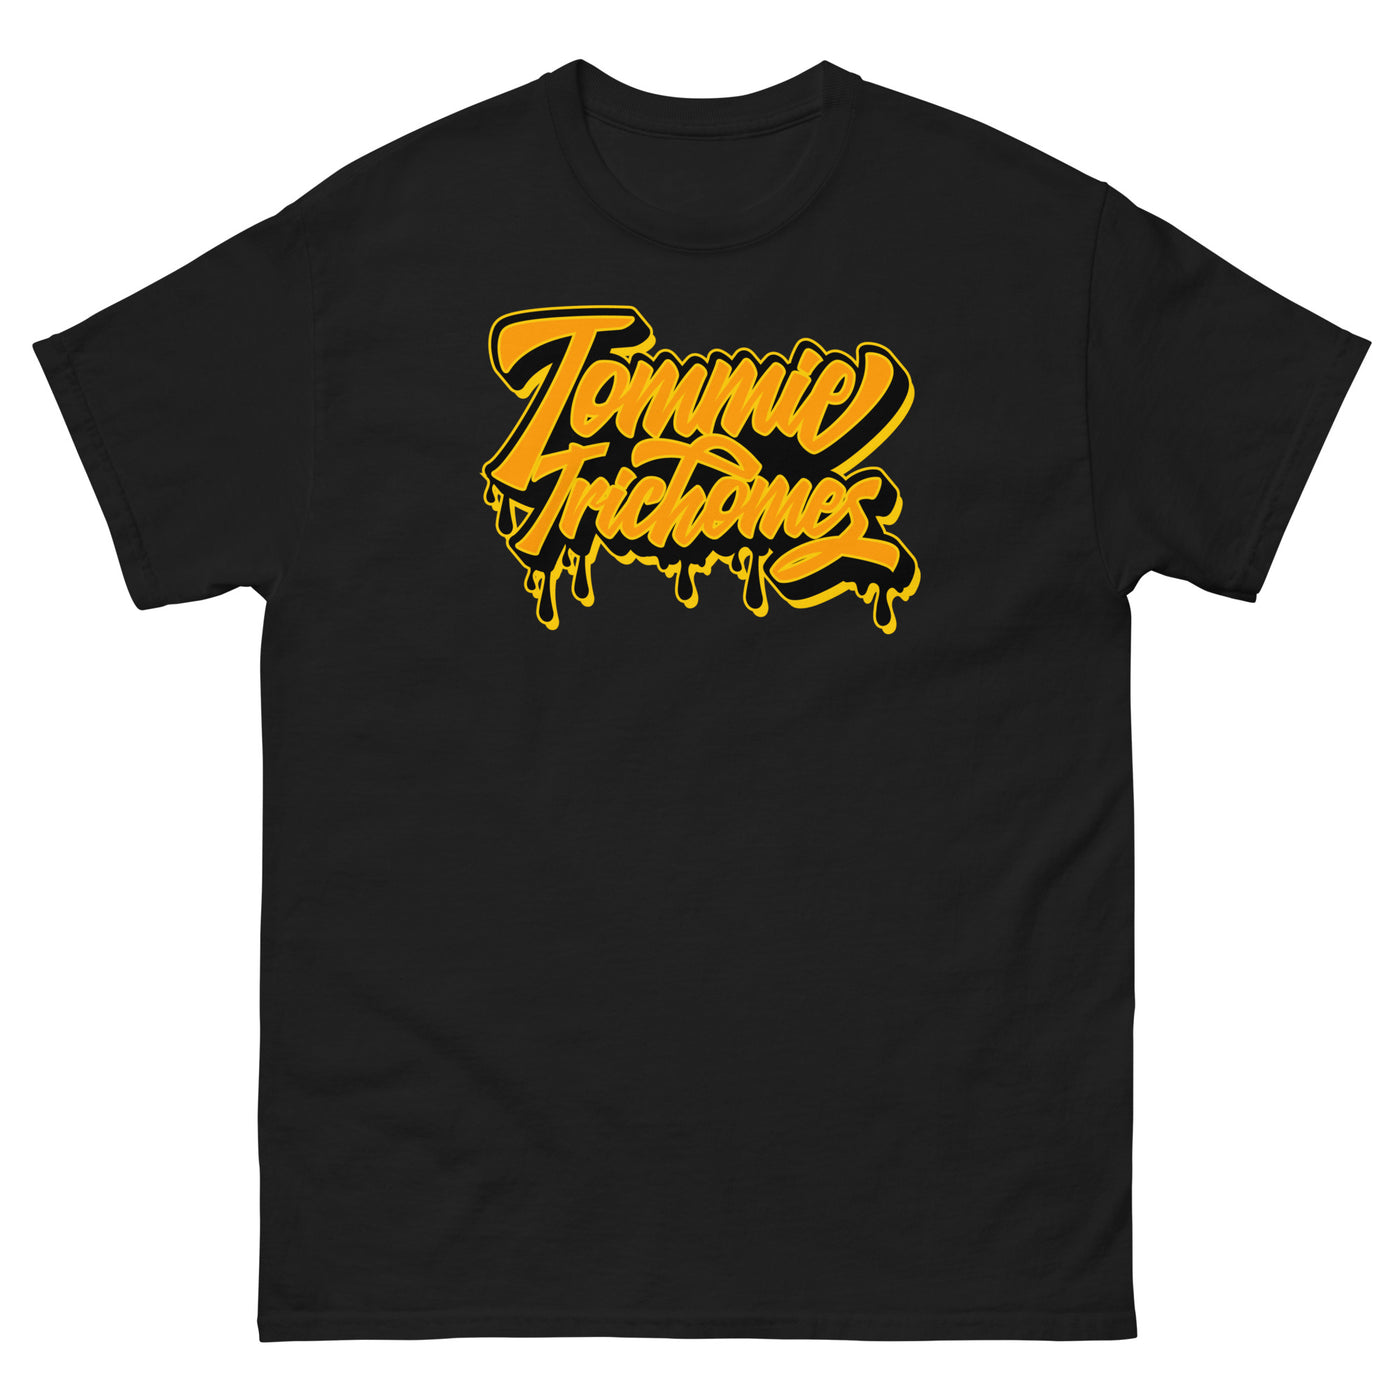 Tommie Trichomes Men's classic tee